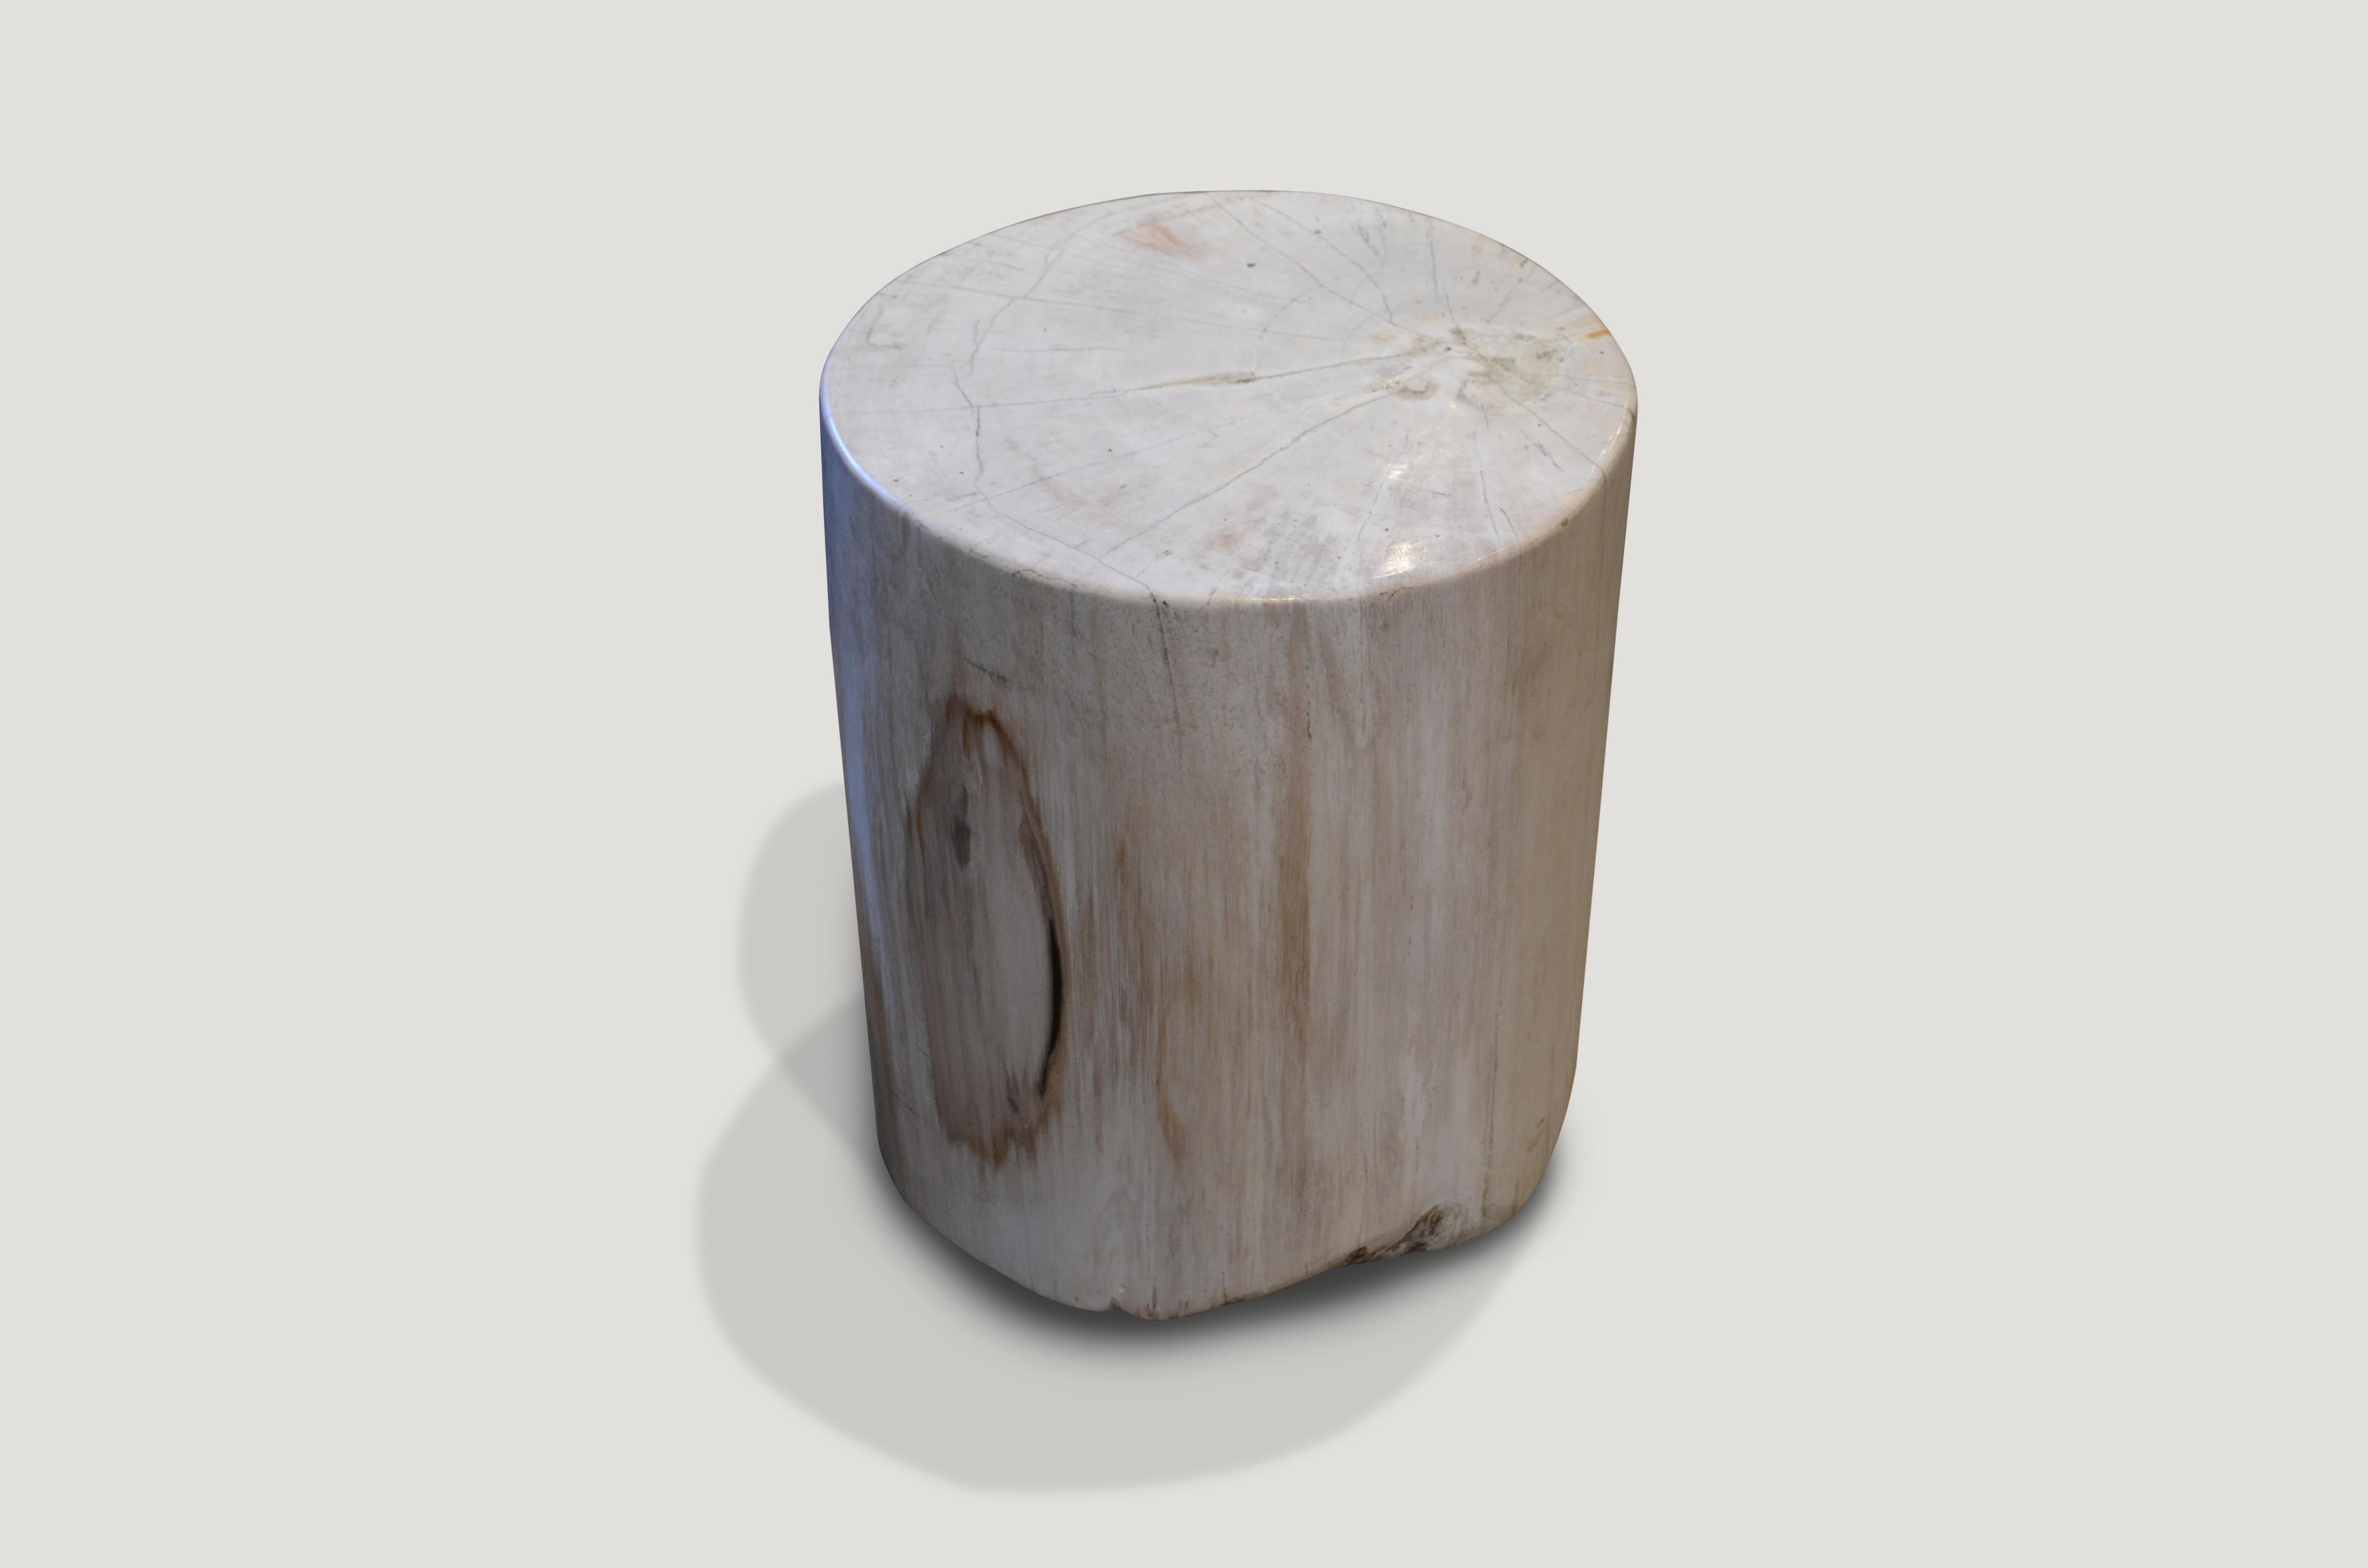 Beautiful white super smooth petrified wood side table.

We source the highest quality petrified wood available. Each piece is hand-selected and highly polished with minimal cracks. Petrified wood is extremely versatile – even great inside a